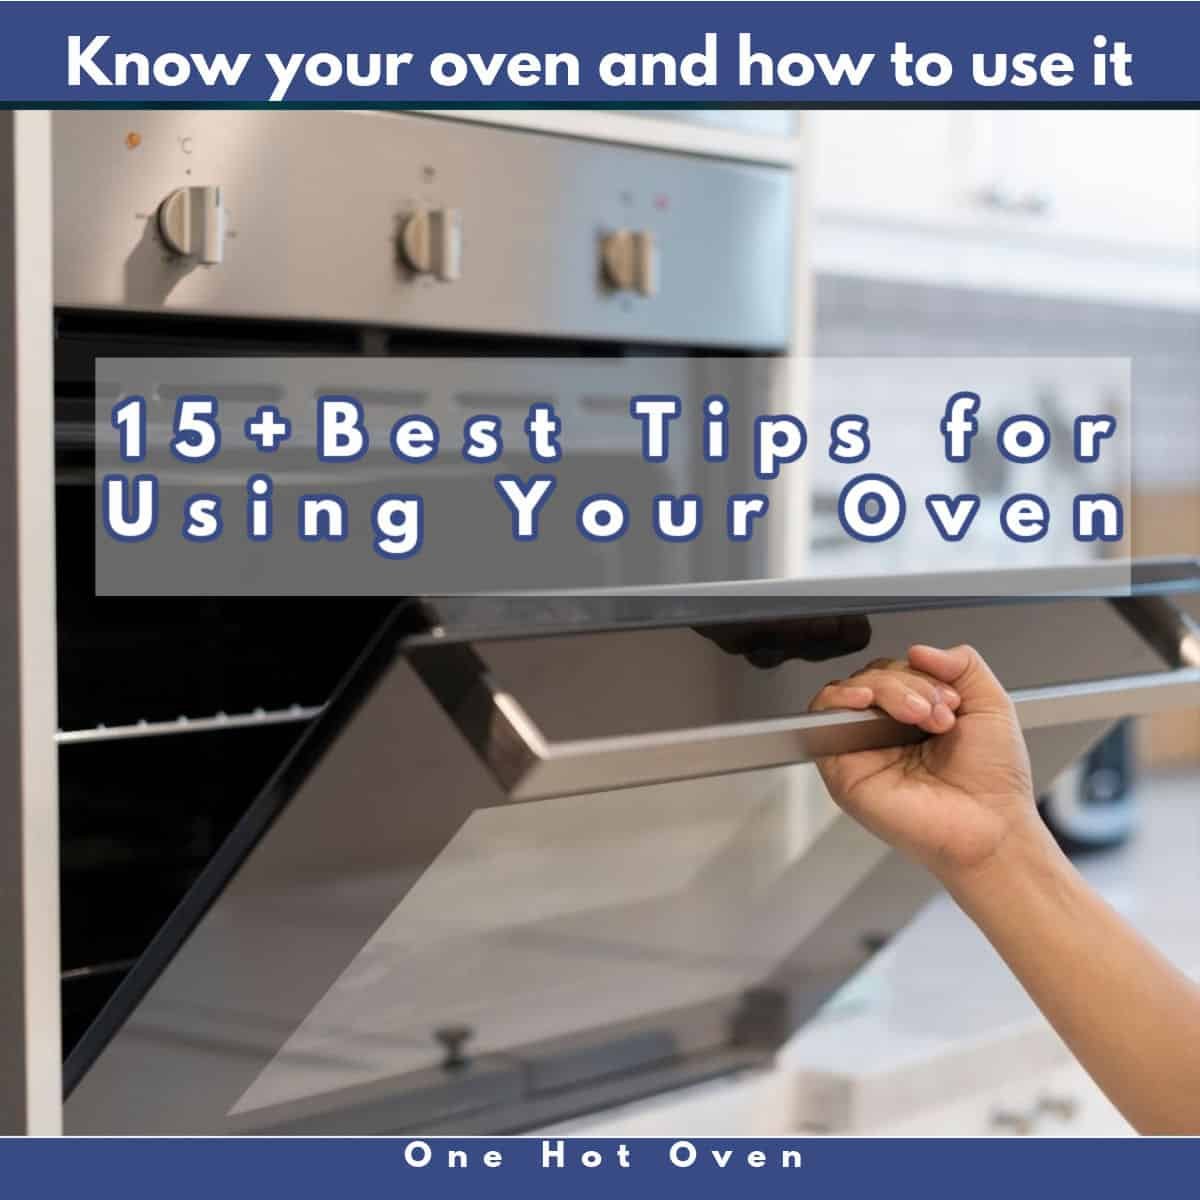 5 Tips for Perfect Oven Temperature Control